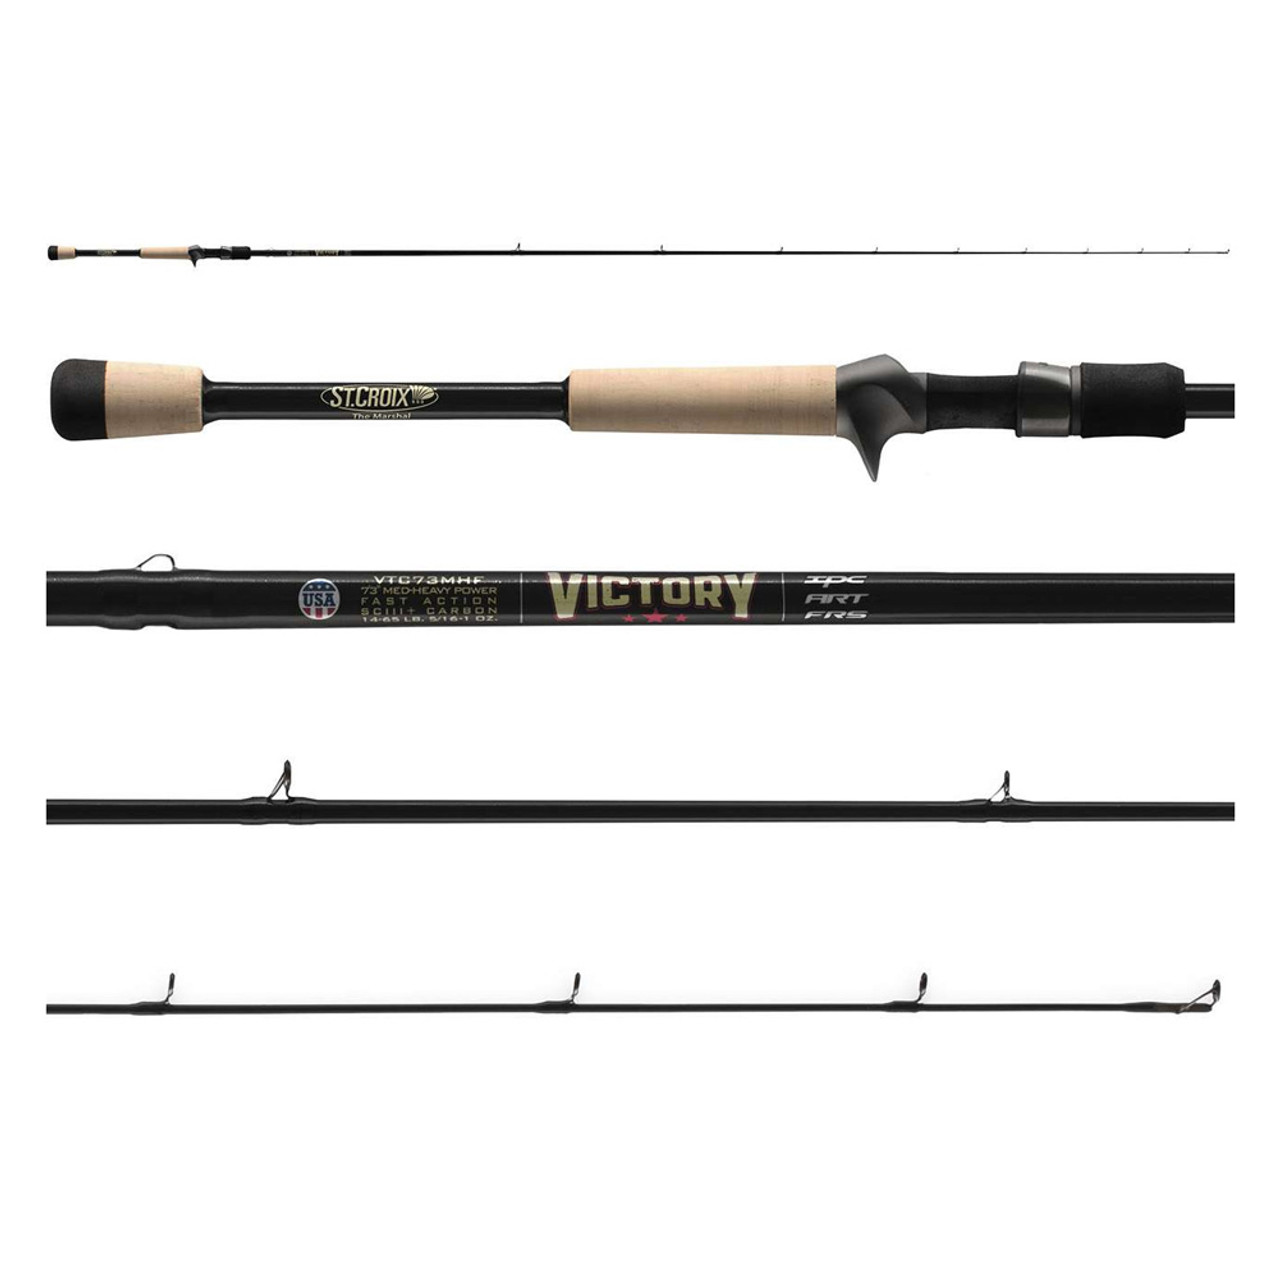 ST_CROIX ROD Victory 7ft 1in MHF Casting Rod VTC71MHF